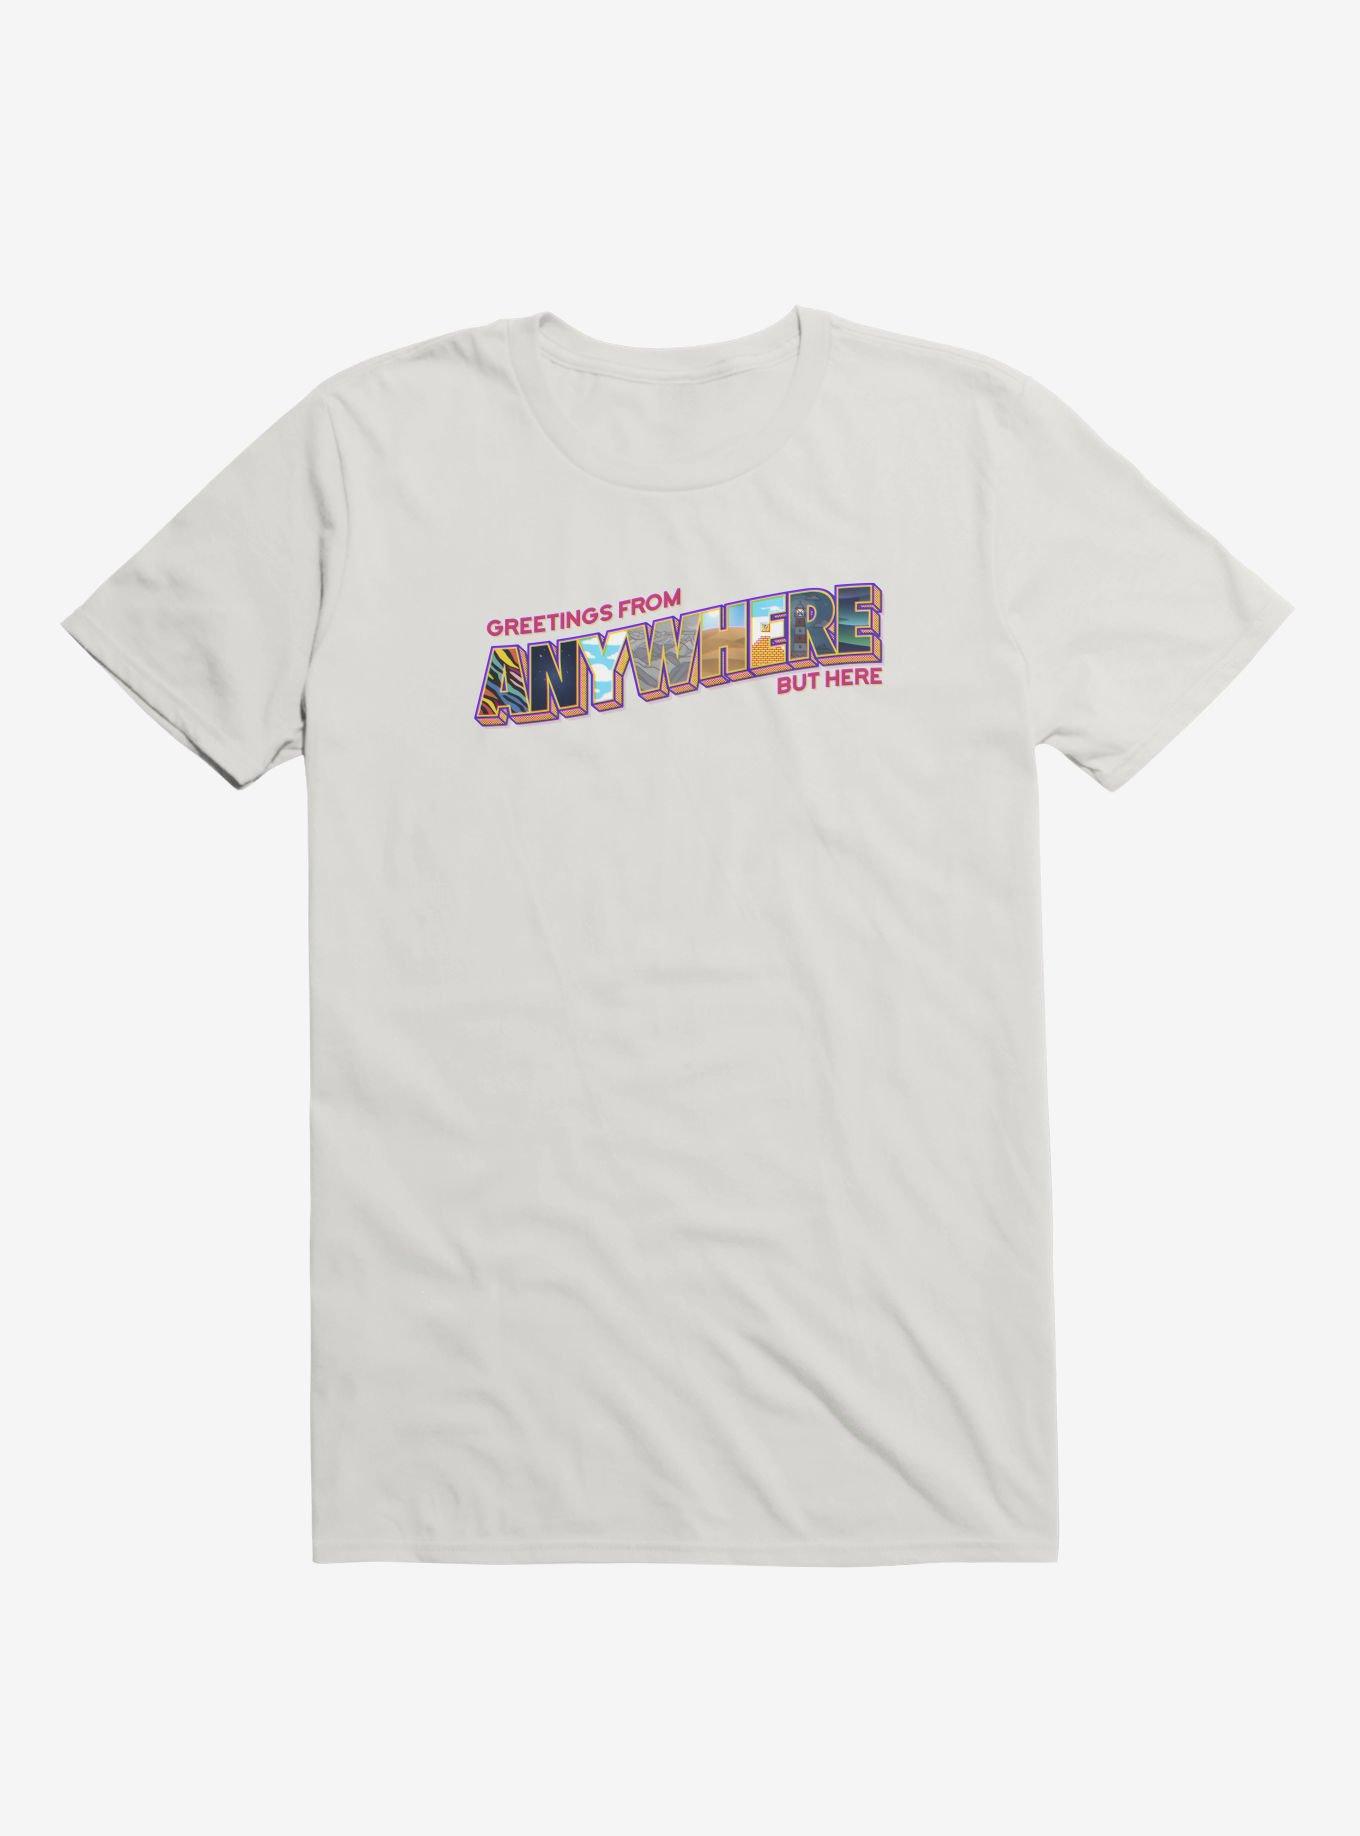 Anywhere But Here T-Shirt, WHITE, hi-res